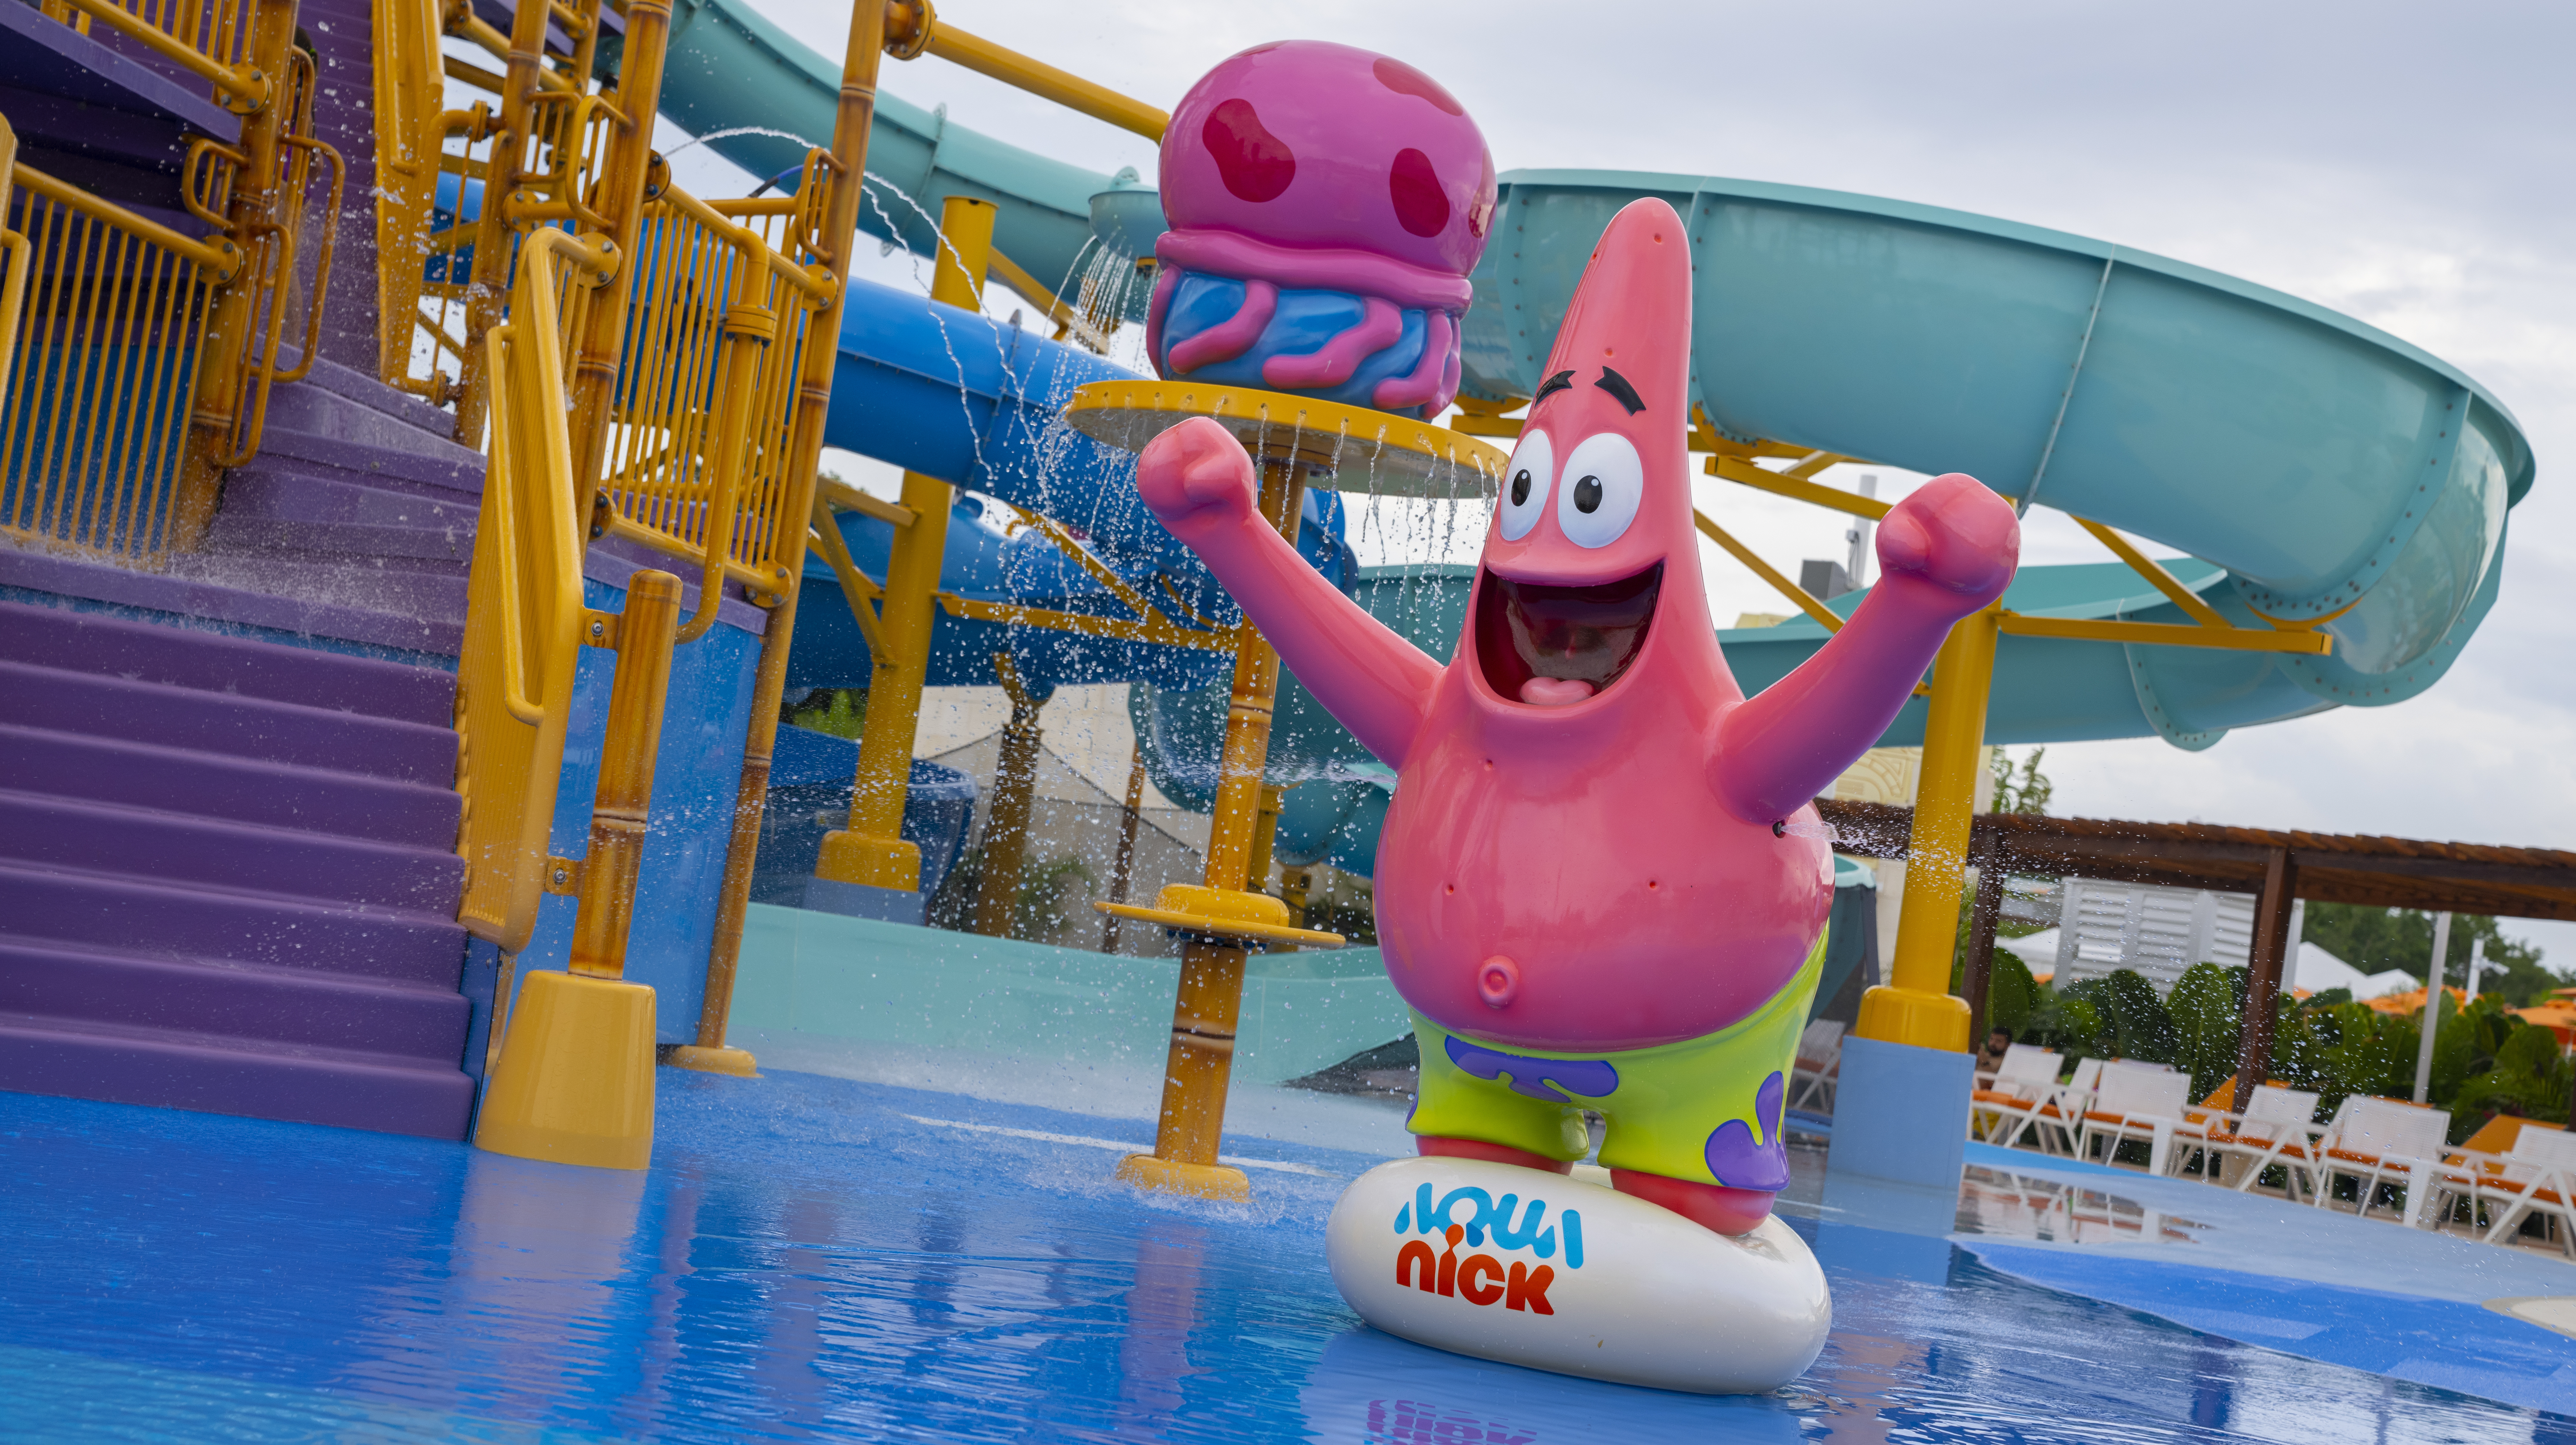 Theming, AquaNick at Nickelodeon Hotel and Resort, Cancun, Mexico